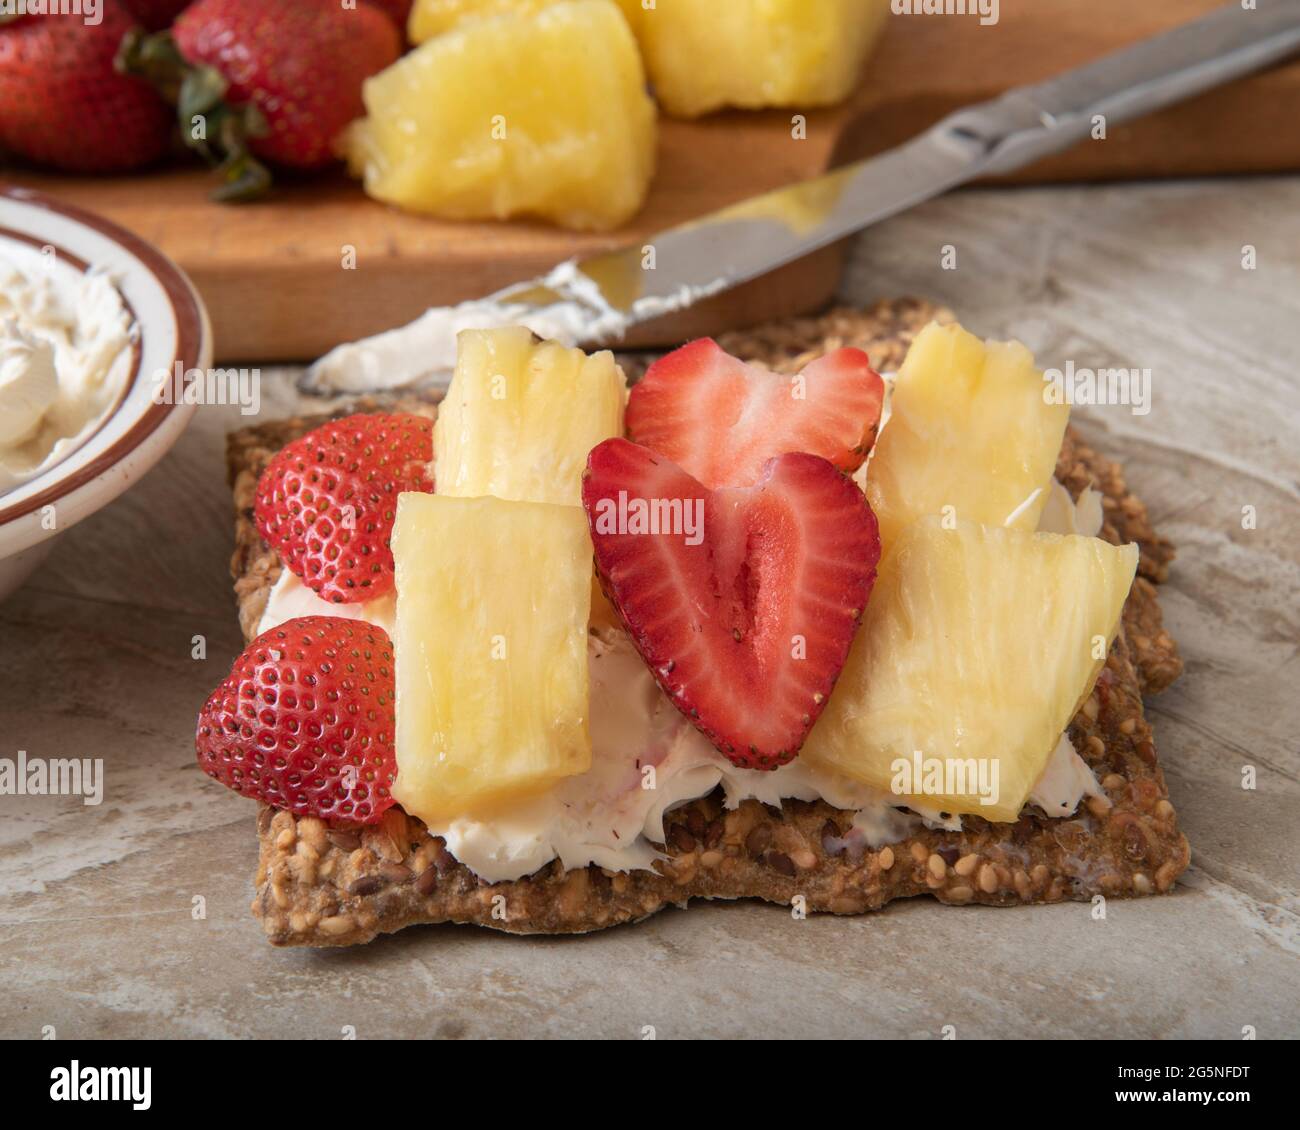 Gluten free crispbread with cream cheese, strawberries and pineapple for a healthy snack igh angle view Stock Photo